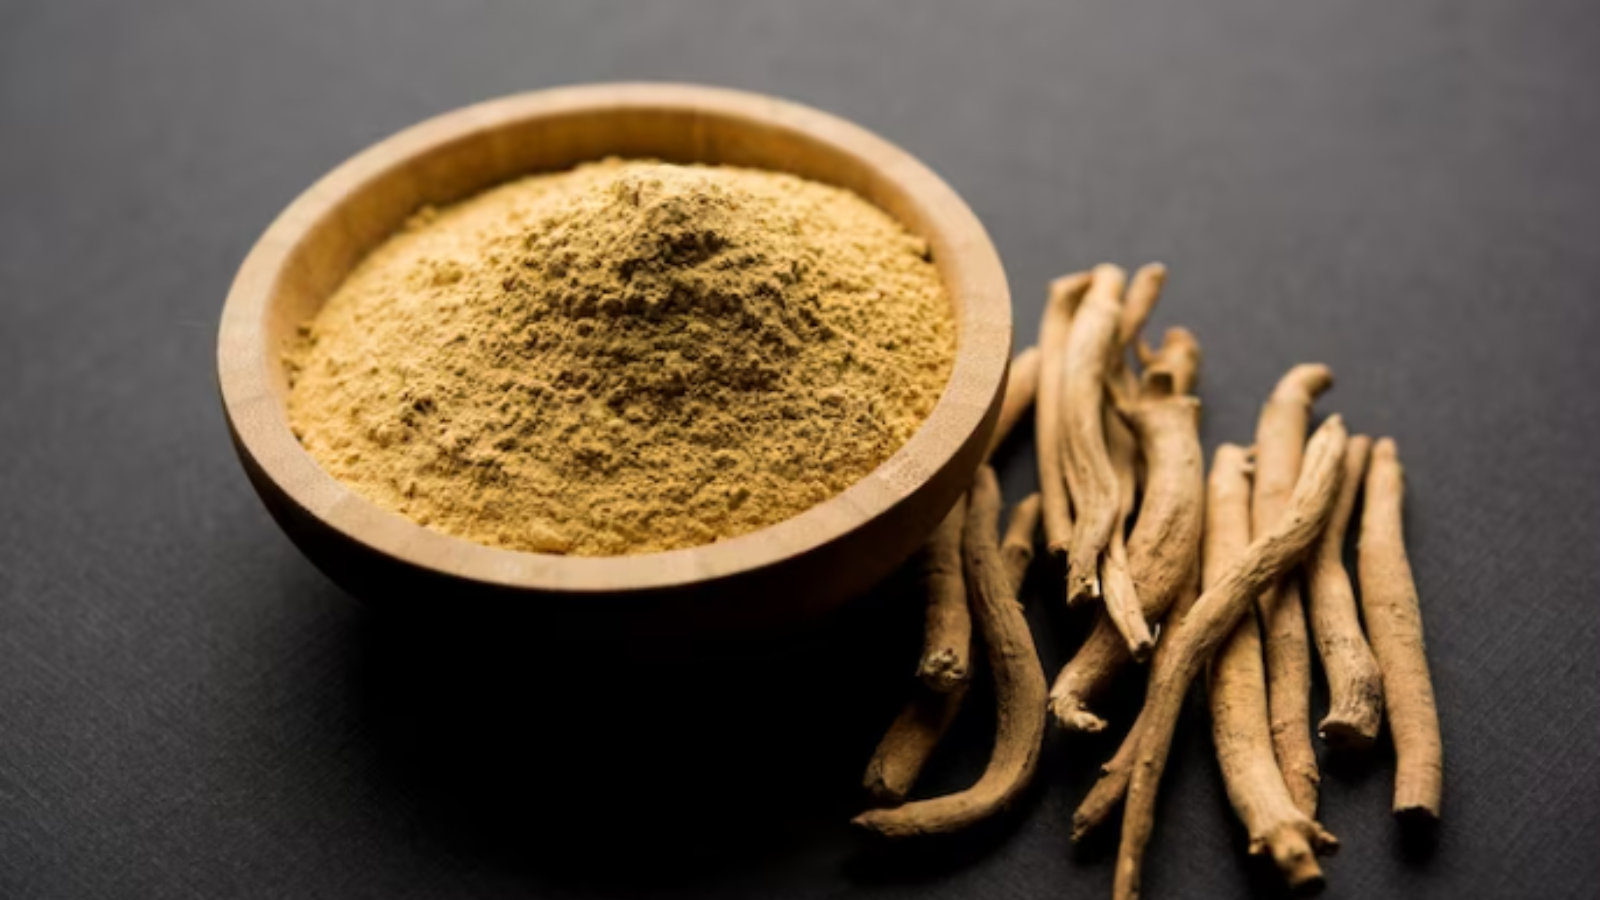 Premium-Photo-Photo-ashwagandha-or-aswaganda-or-indian-ginseng-is-an-ayurveda-medicine-in-stem-and-powder-form-isolated-on-plain-background-selective-focus